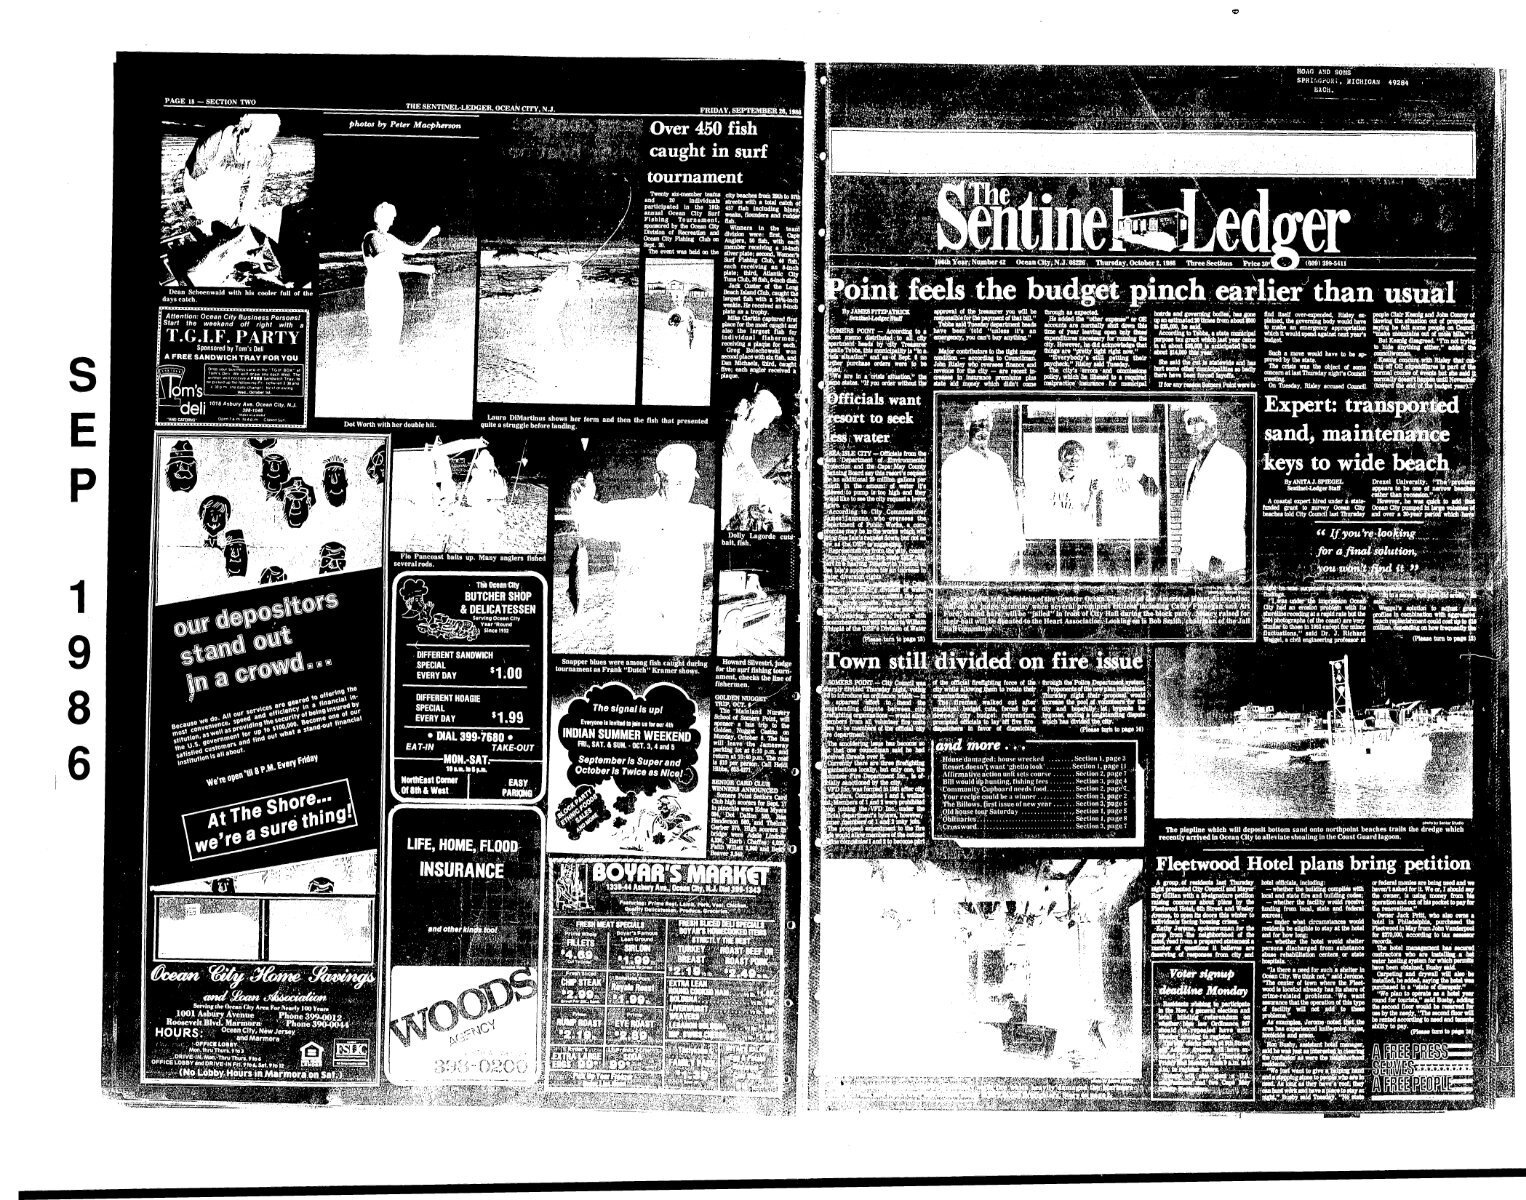 Oct 1986 - Archives Newspaper County Ocean of